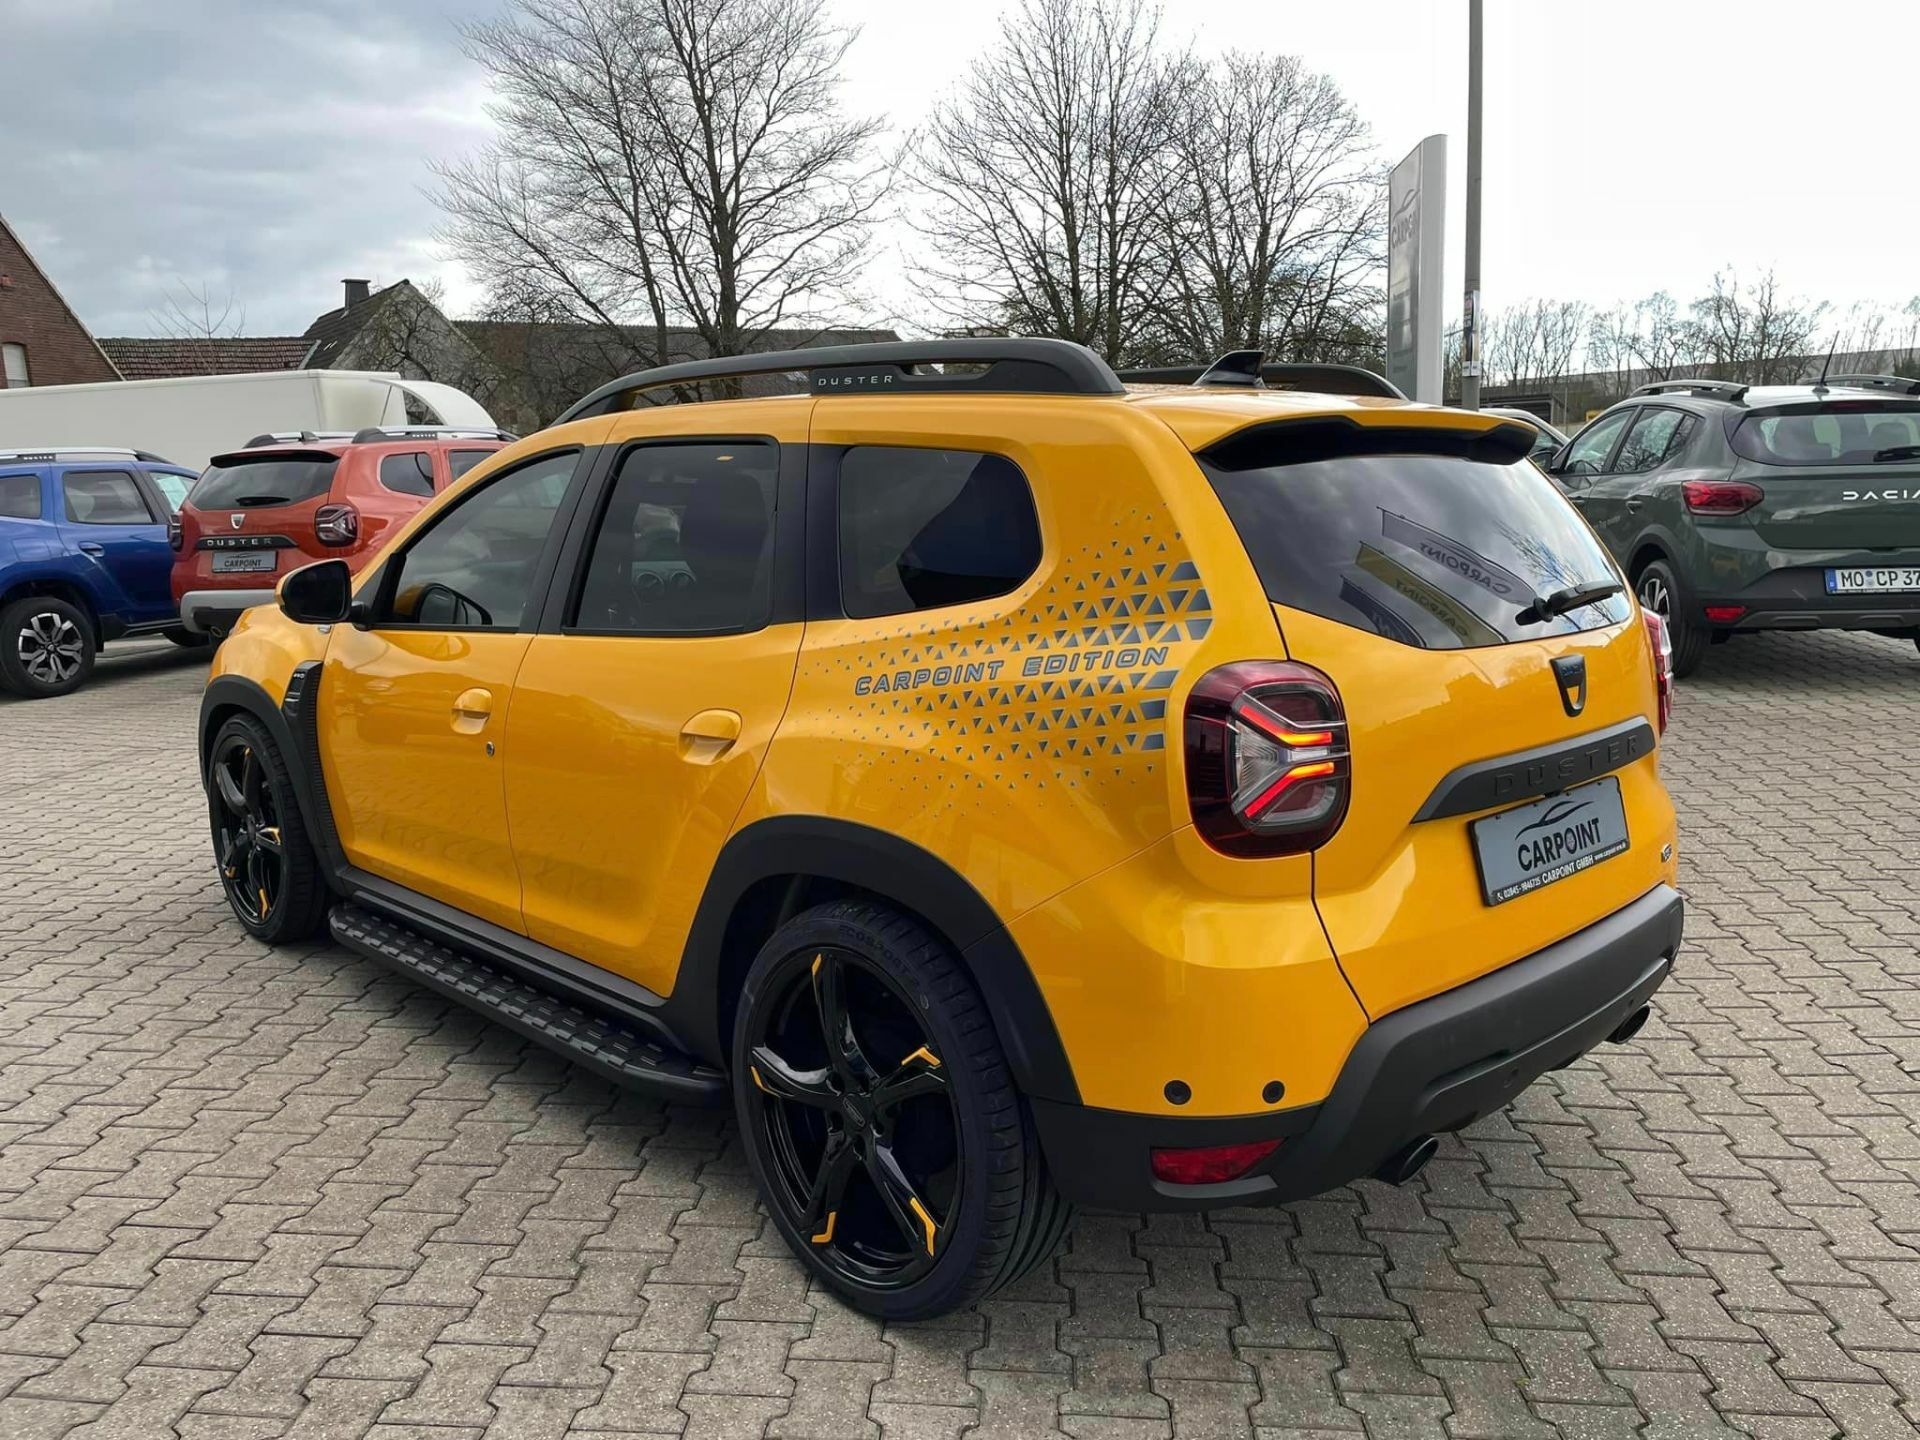 Understated Duster CarPoint Yellow Edition unveiled